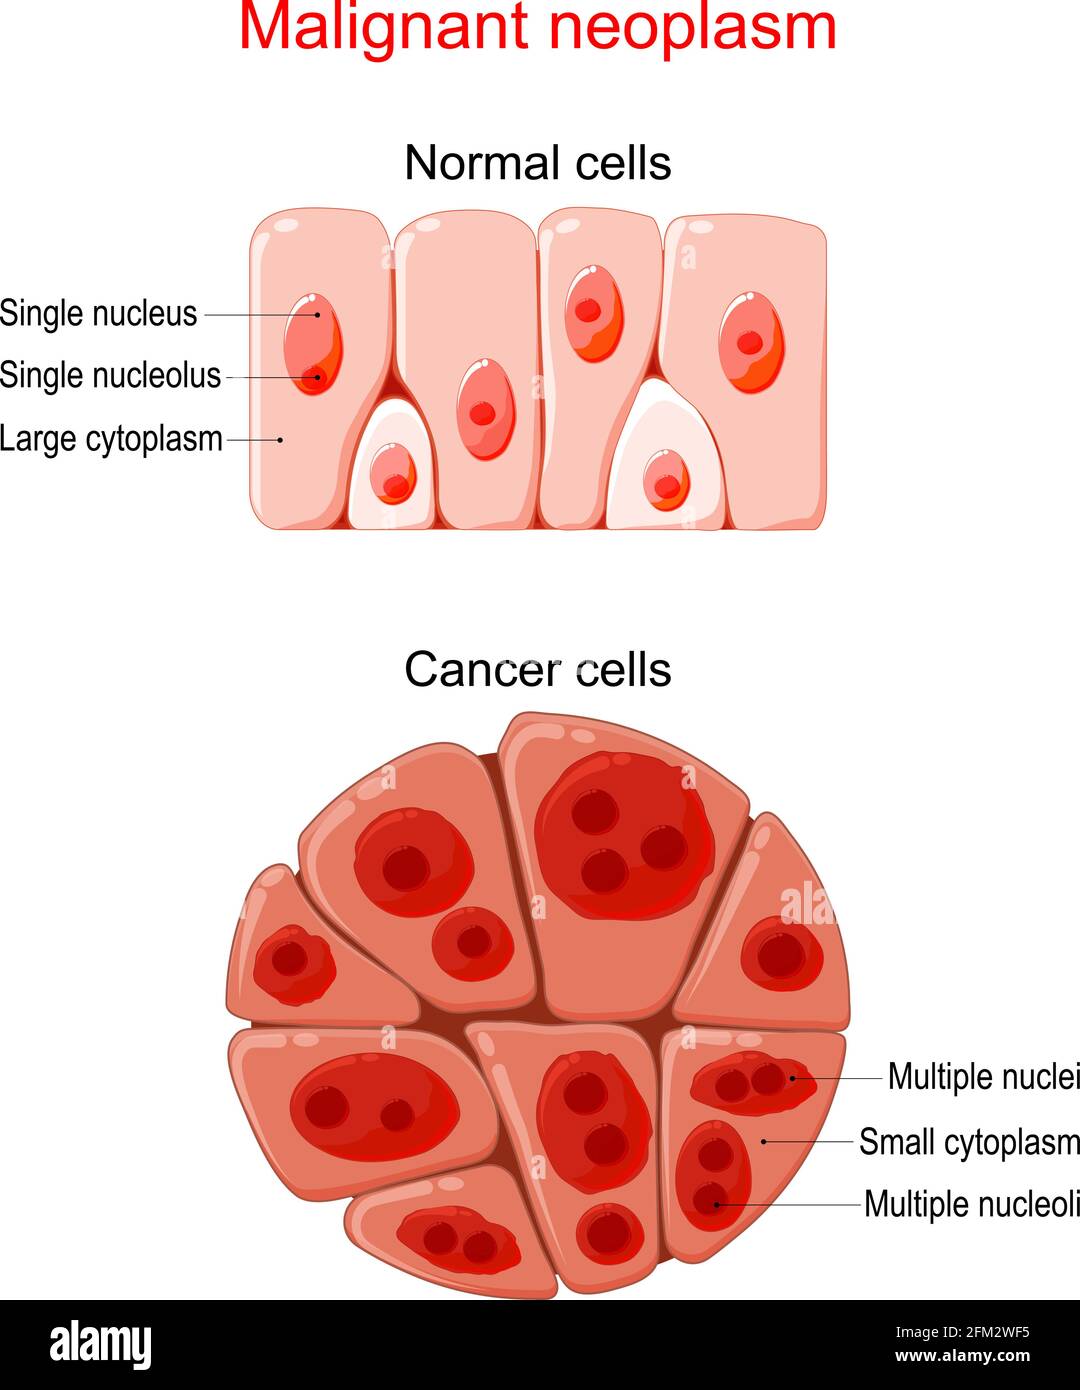 Malignant neoplasm. Cancer and Normal cells. comparison and difference between healthy tissue and tumor. details about chromatin, nucleus Stock Vector